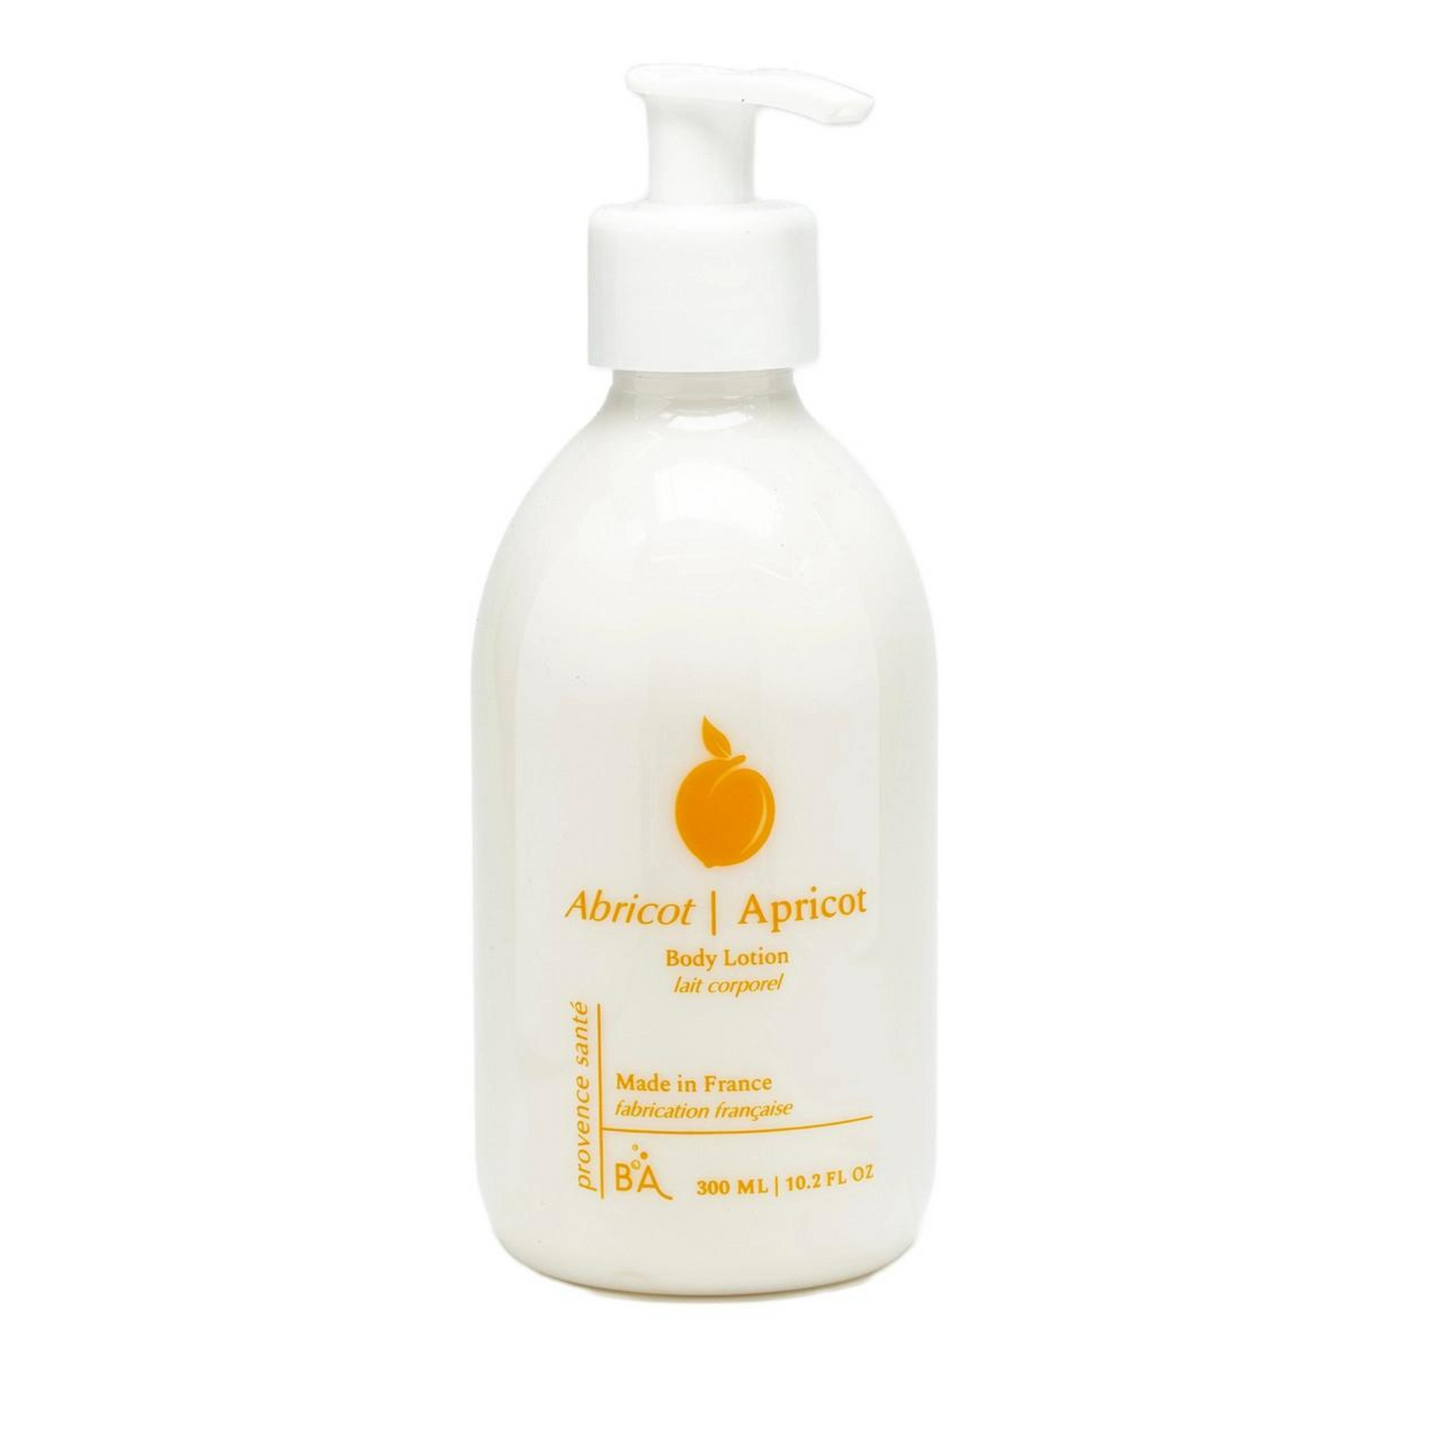 Primary Image of Provence Sante Apricot Body Lotion (10.2 oz) 